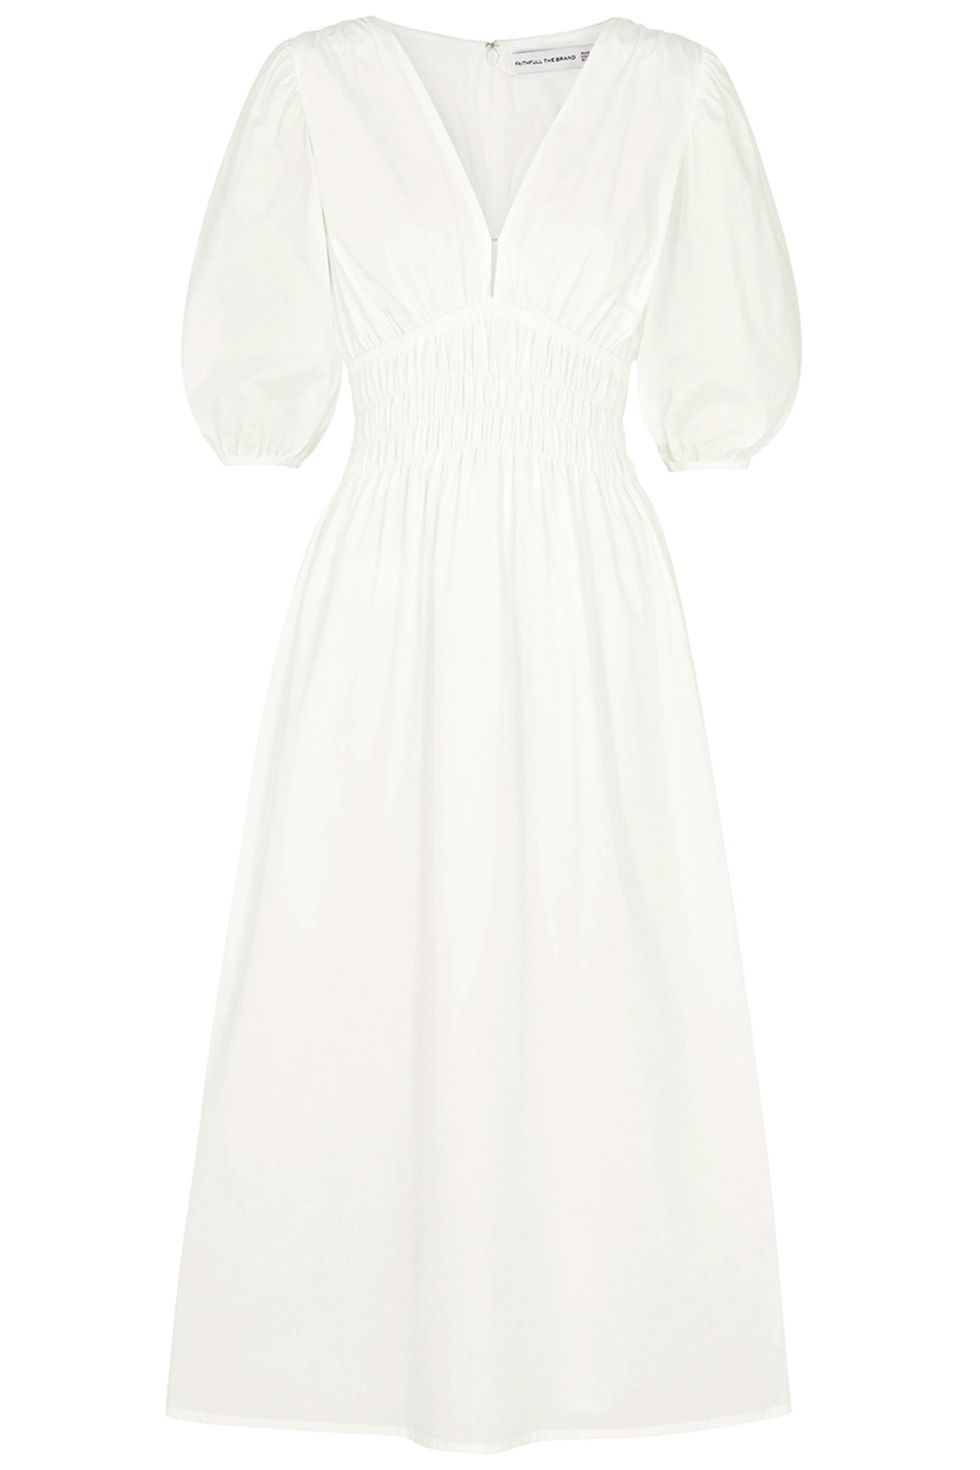 Dadou~Chic: Top 5 White Dresses from Express for This Summer Under